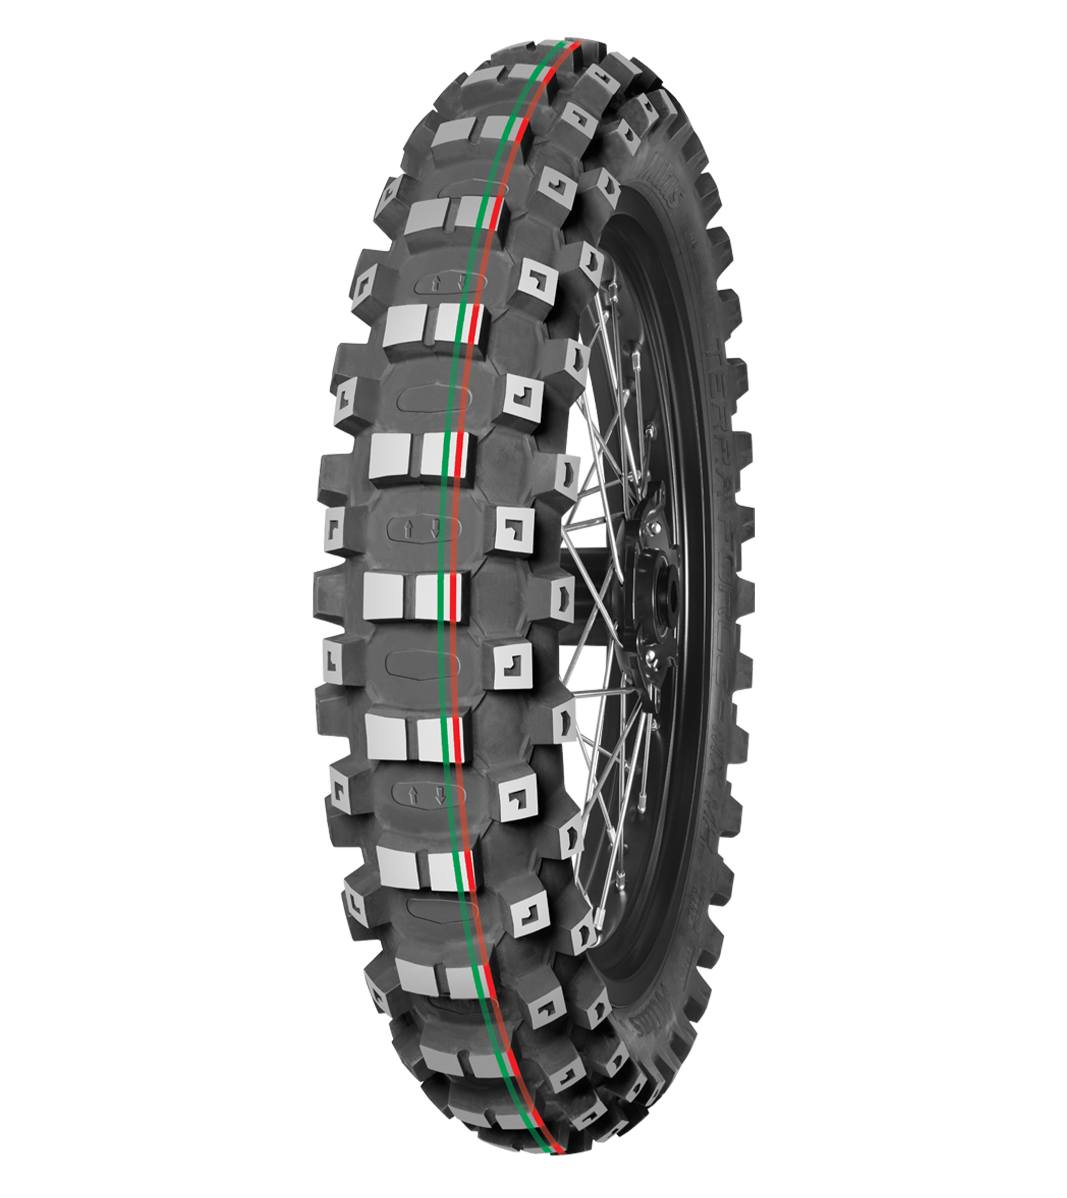 Mitas TERRA FORCE-MX MH 110/90-19 Motocross Competition Off-Road MEDIUM TO HARD 62M Red & Green Tube Rear Tire, 226798, 110/90-19, Motocross, Motocross Competition, Off-Road, Rear, Terra Force, Terra Force-MX MH, Trail, Tires - Imported and distributed in North & South America by Lindeco Genuine Powersports - Premier Powersports Equipment and Accessories for Motorcycle Enthusiasts, Professional Riders and Dealers.